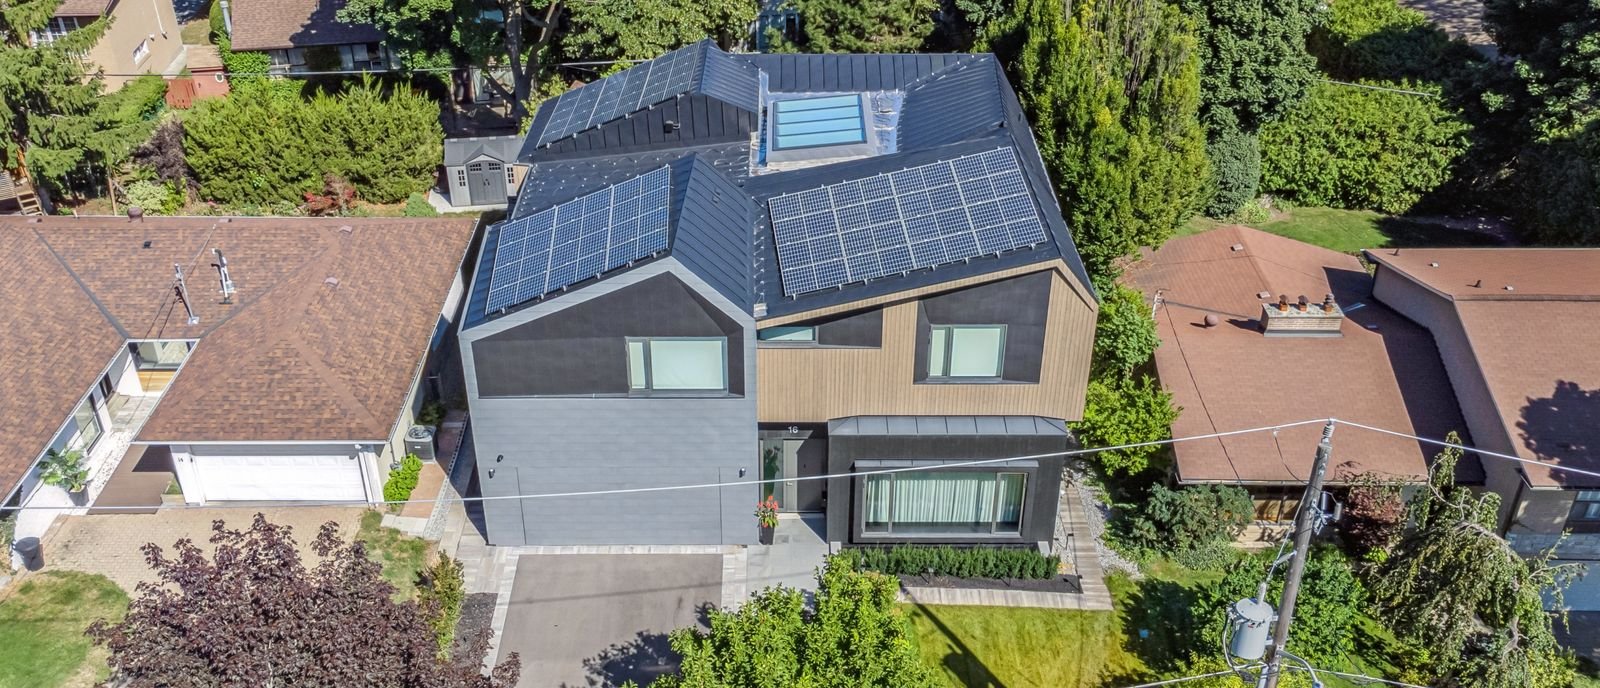 aerial rooftop modern zinc cladding with solar panels and skylight in home renovation in toronto4